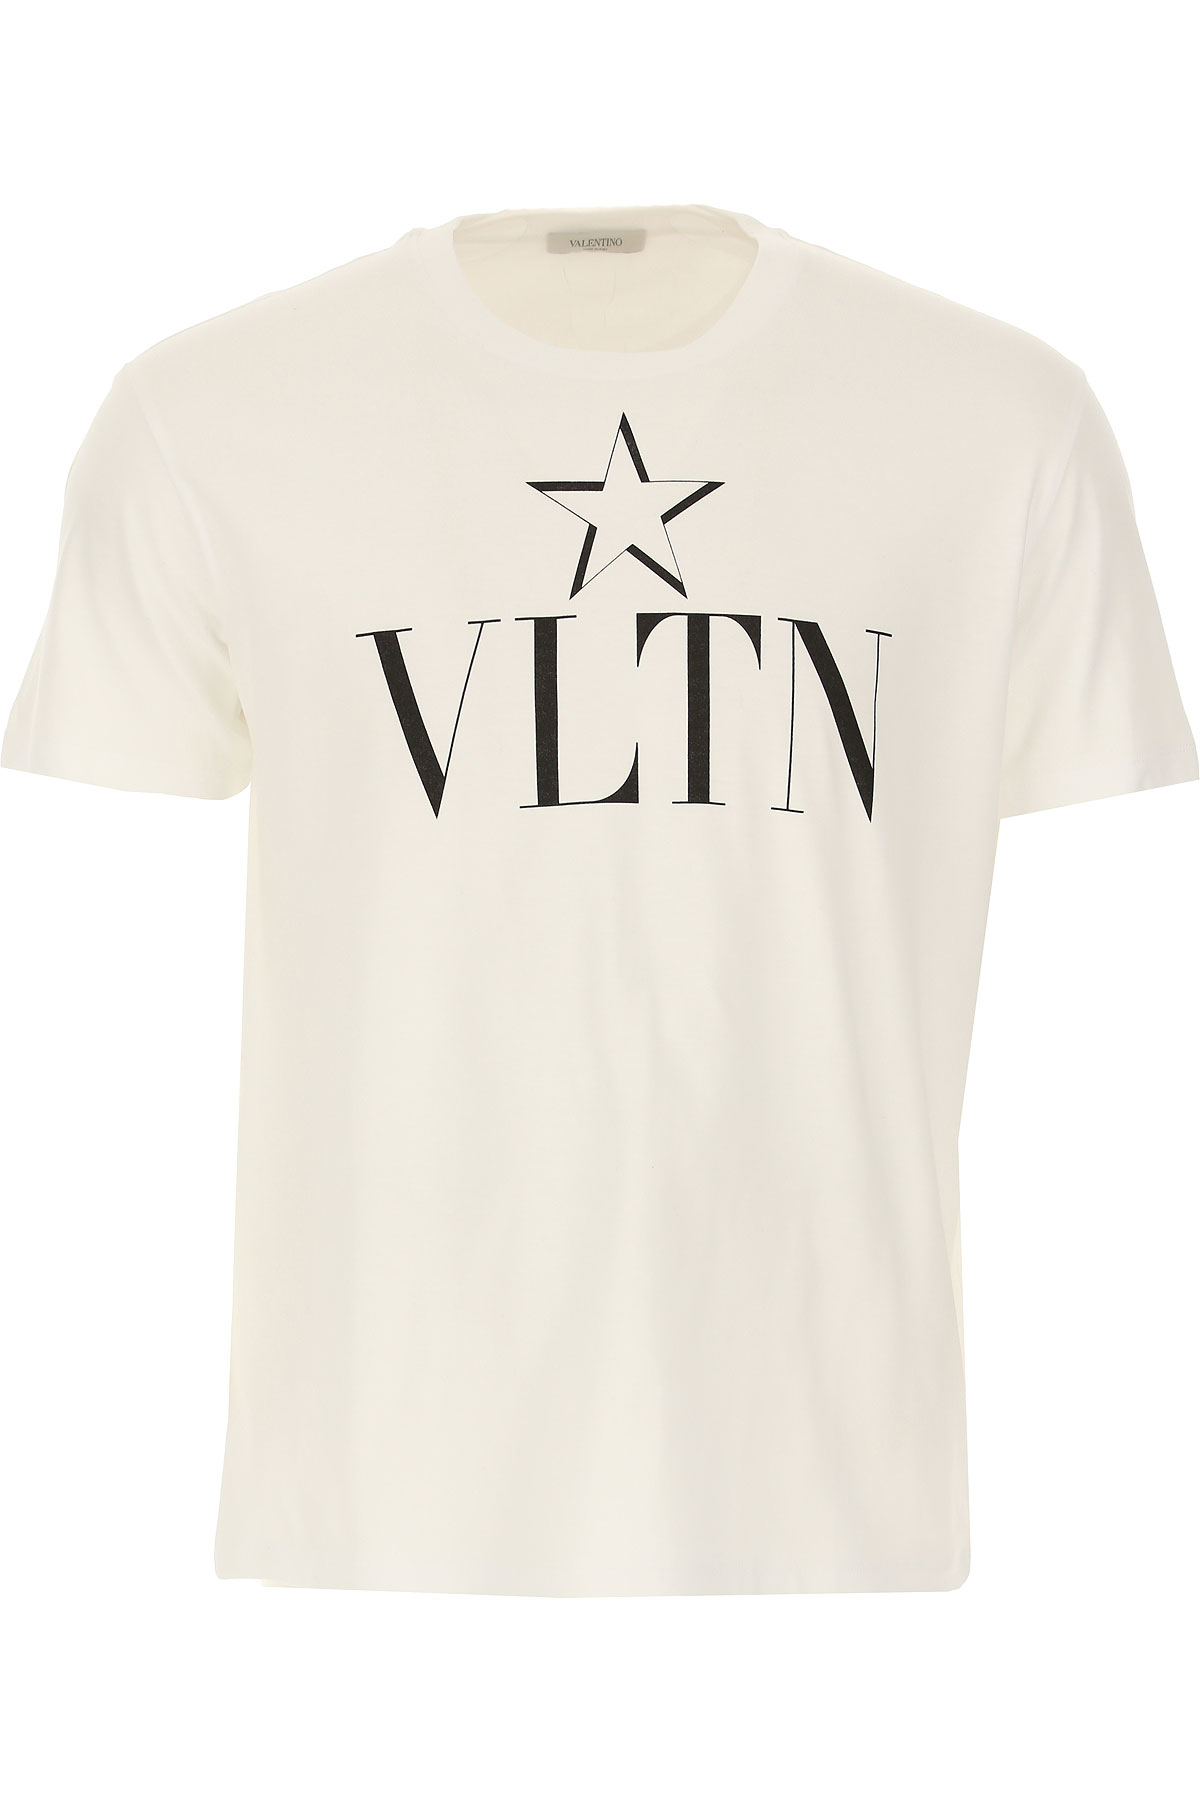 Mens Clothing Valentino, Style code: tv3mg05p-638-a01